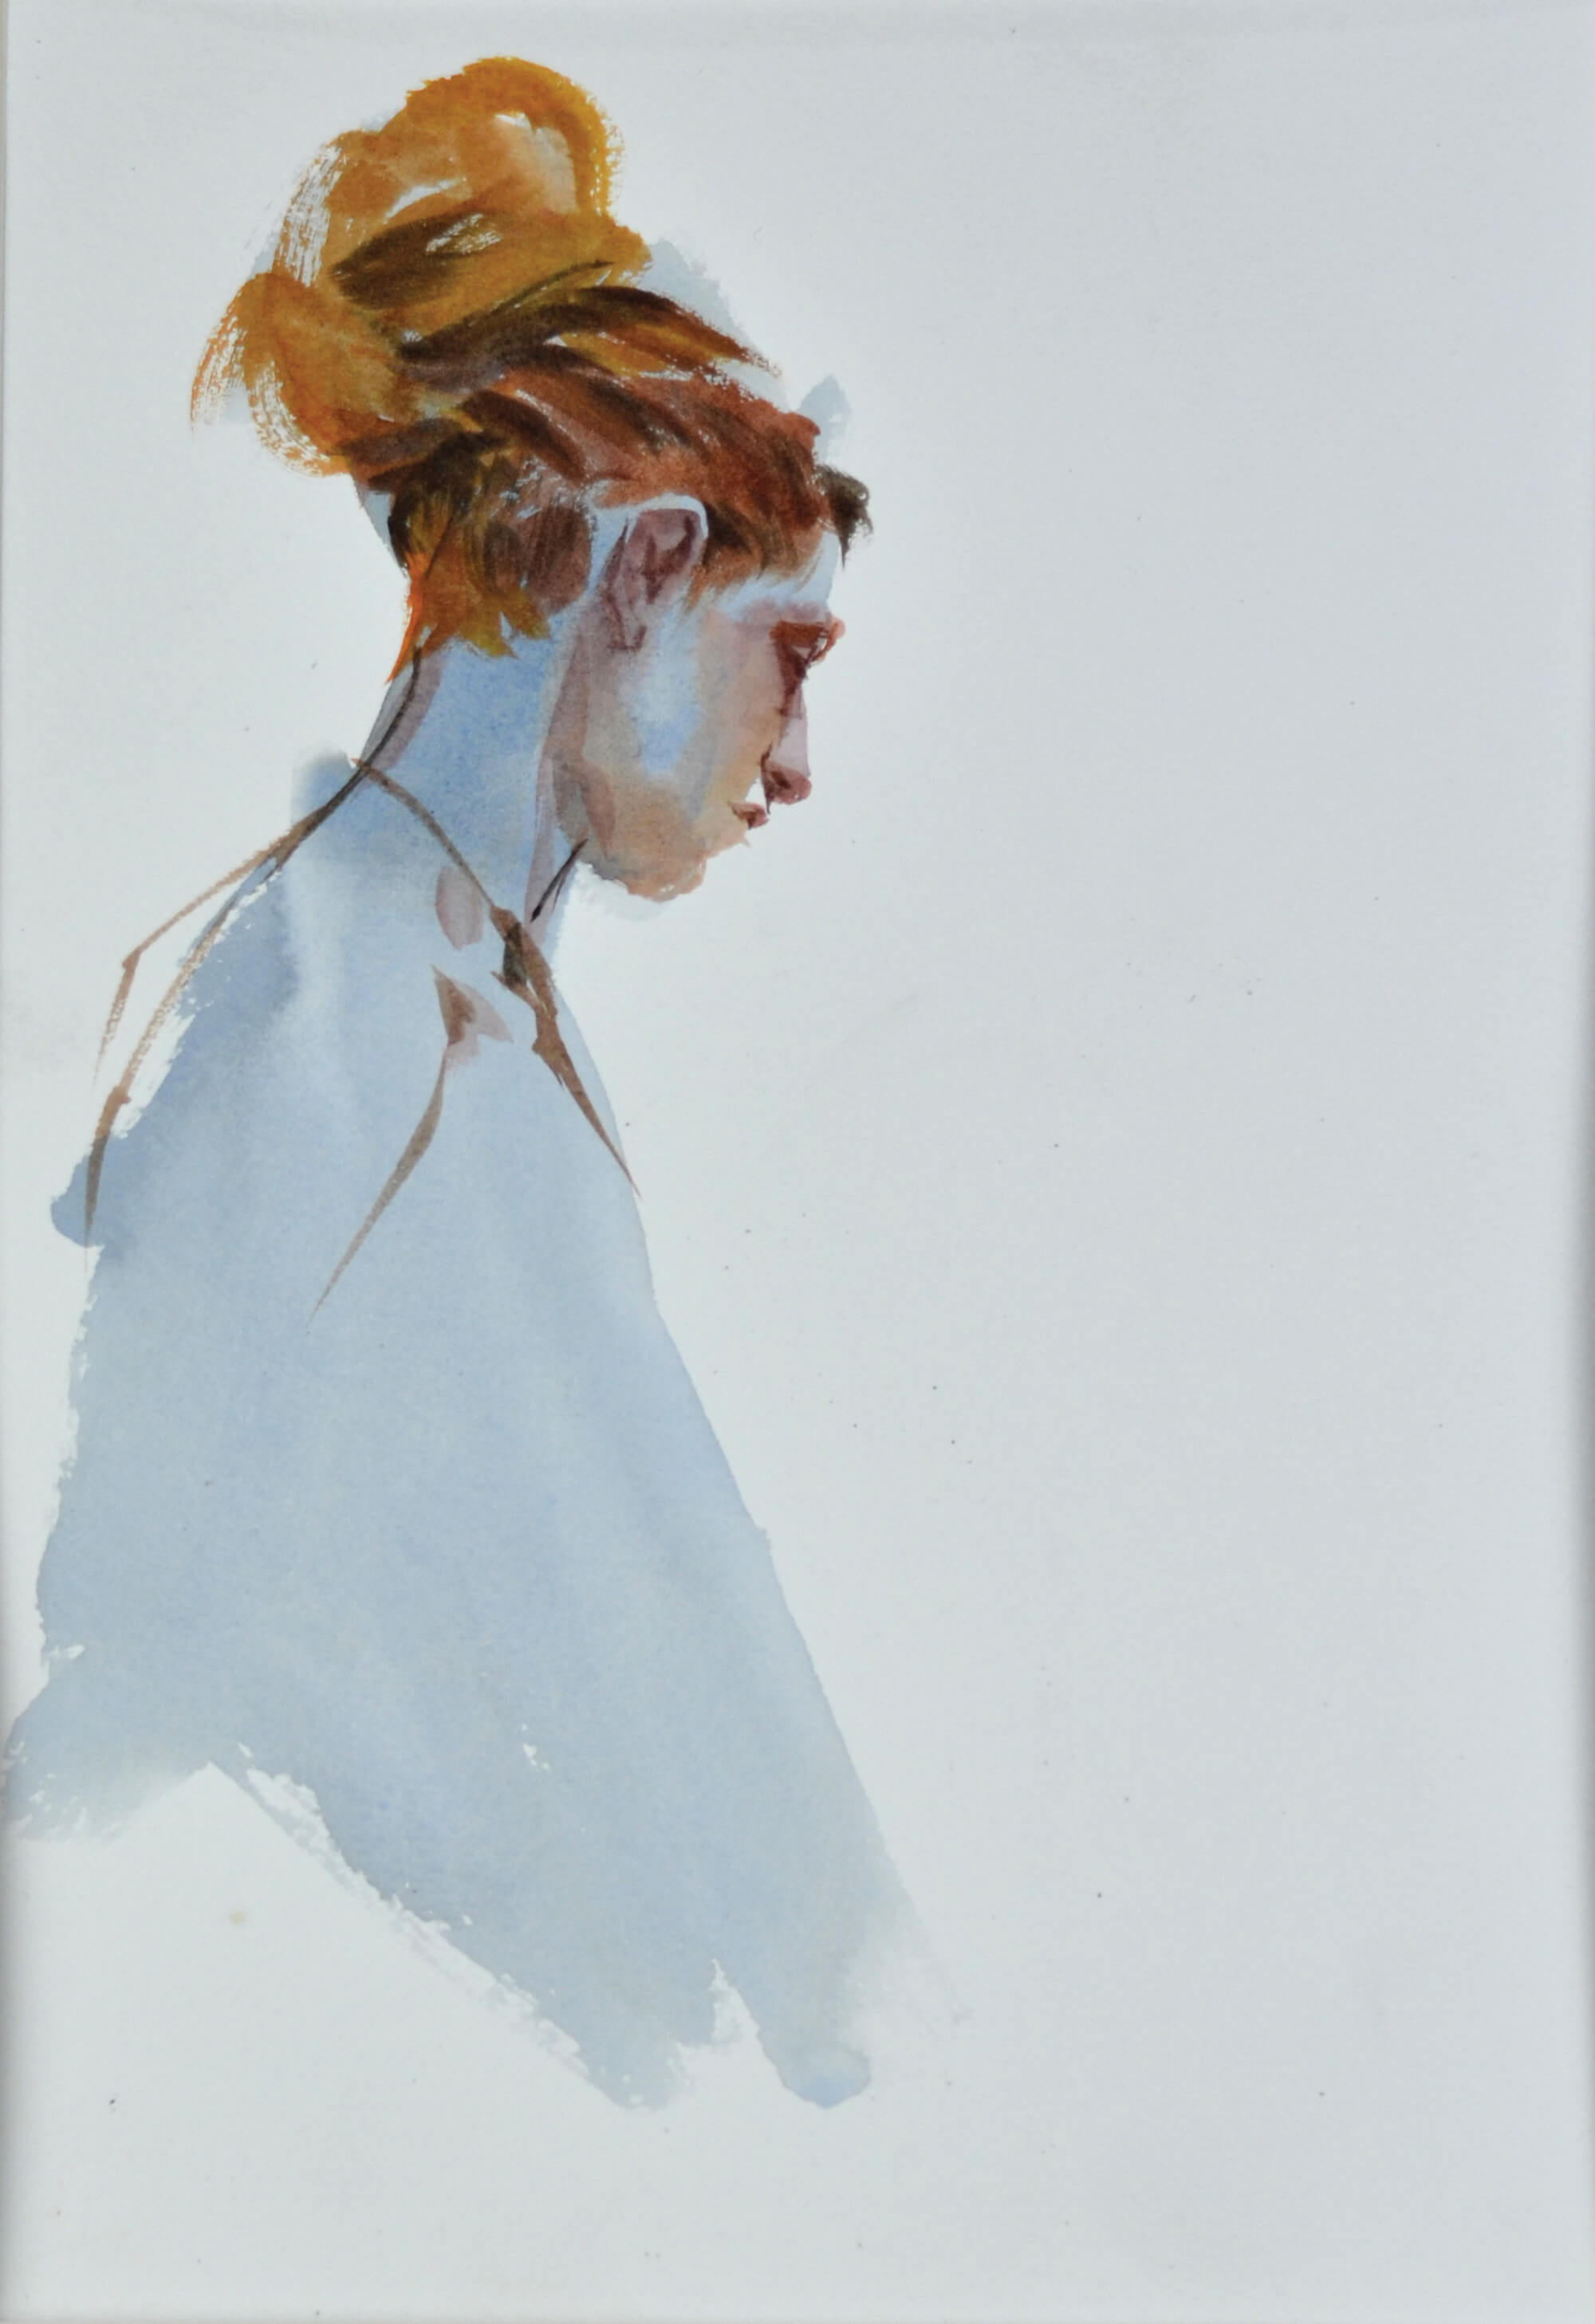 Watercolor painting of a figure model with red hair posed in profile